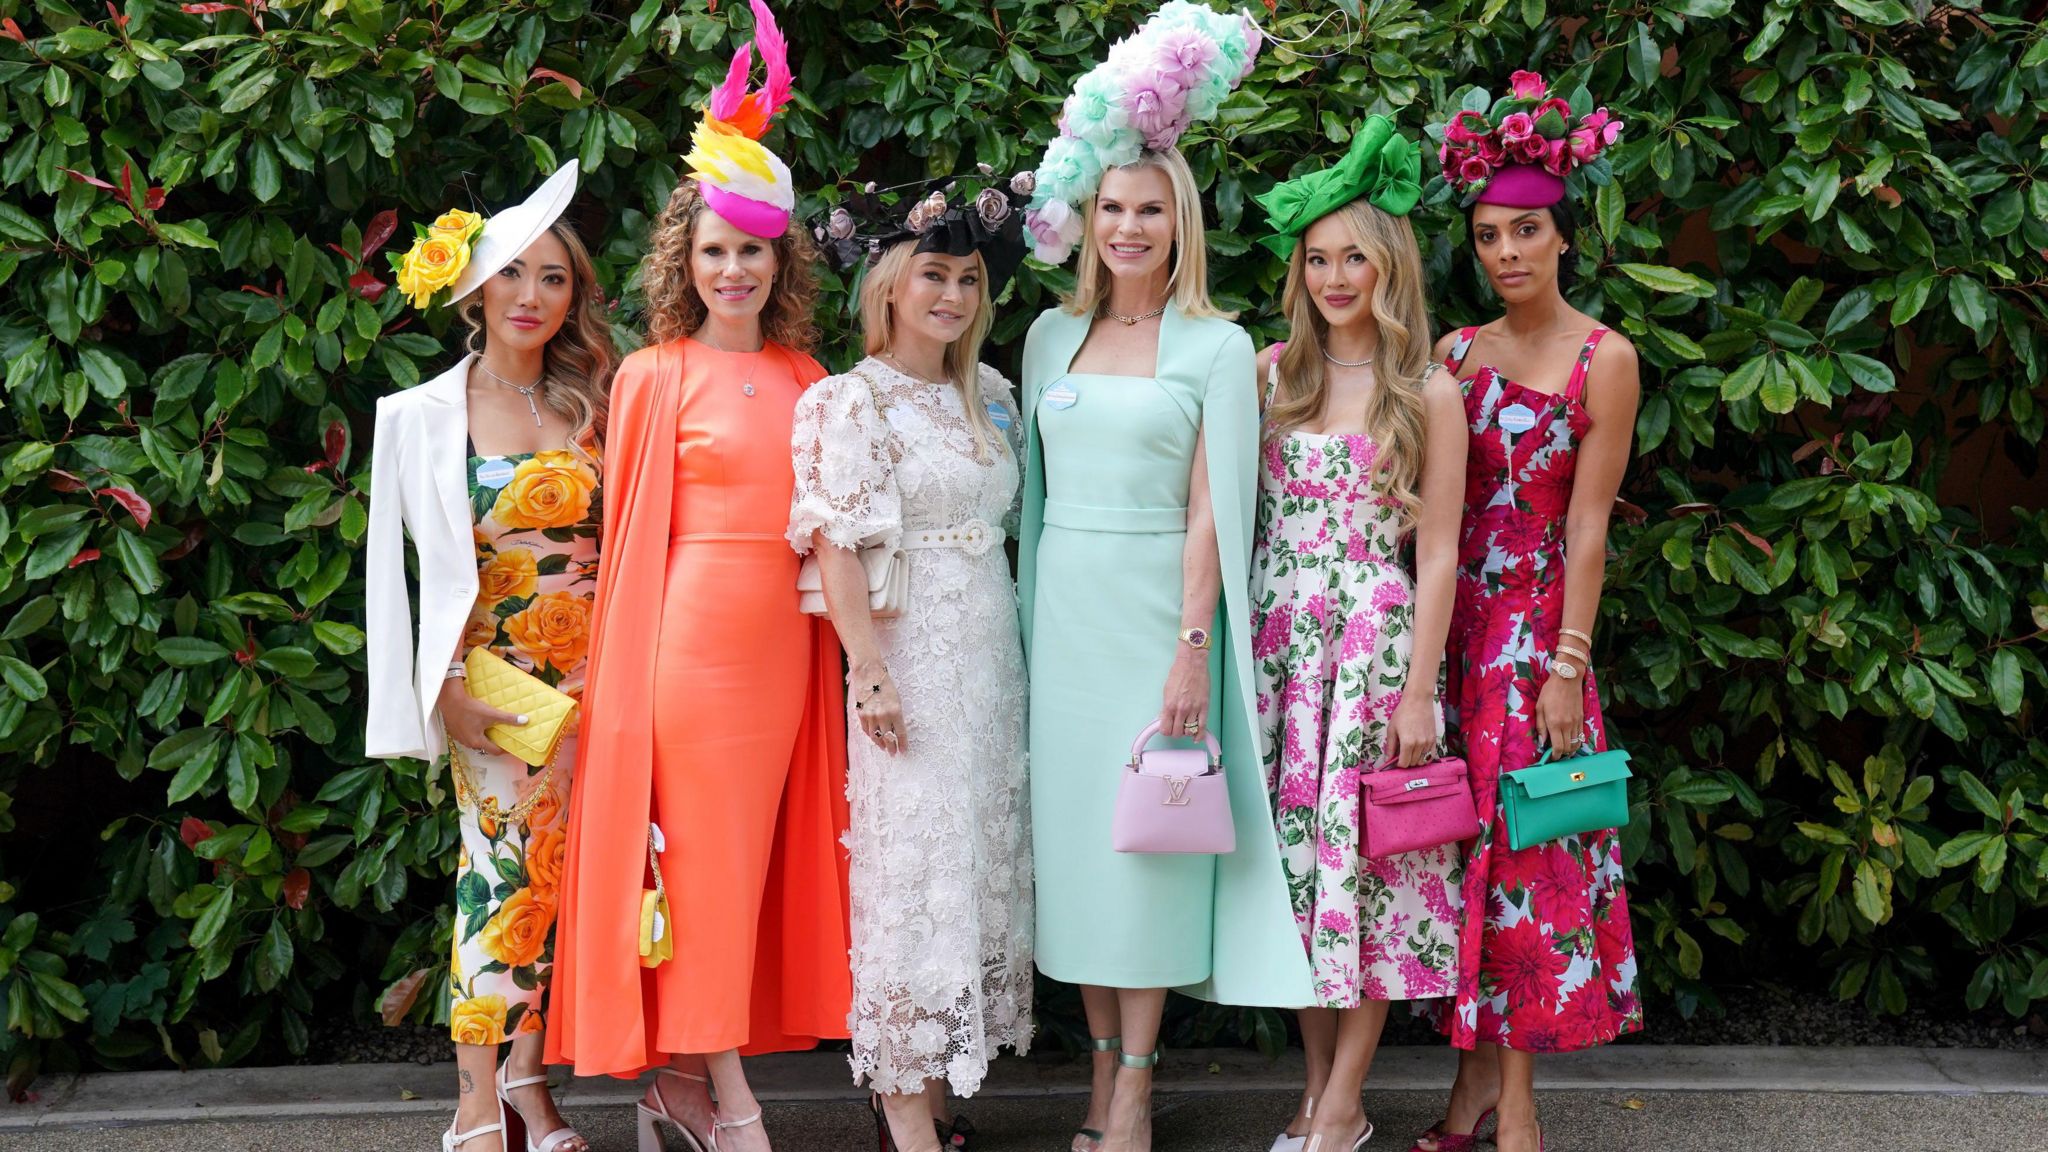 Six young women standing in front of a large green bush, dressed in smart summer dresses and extravagant hats